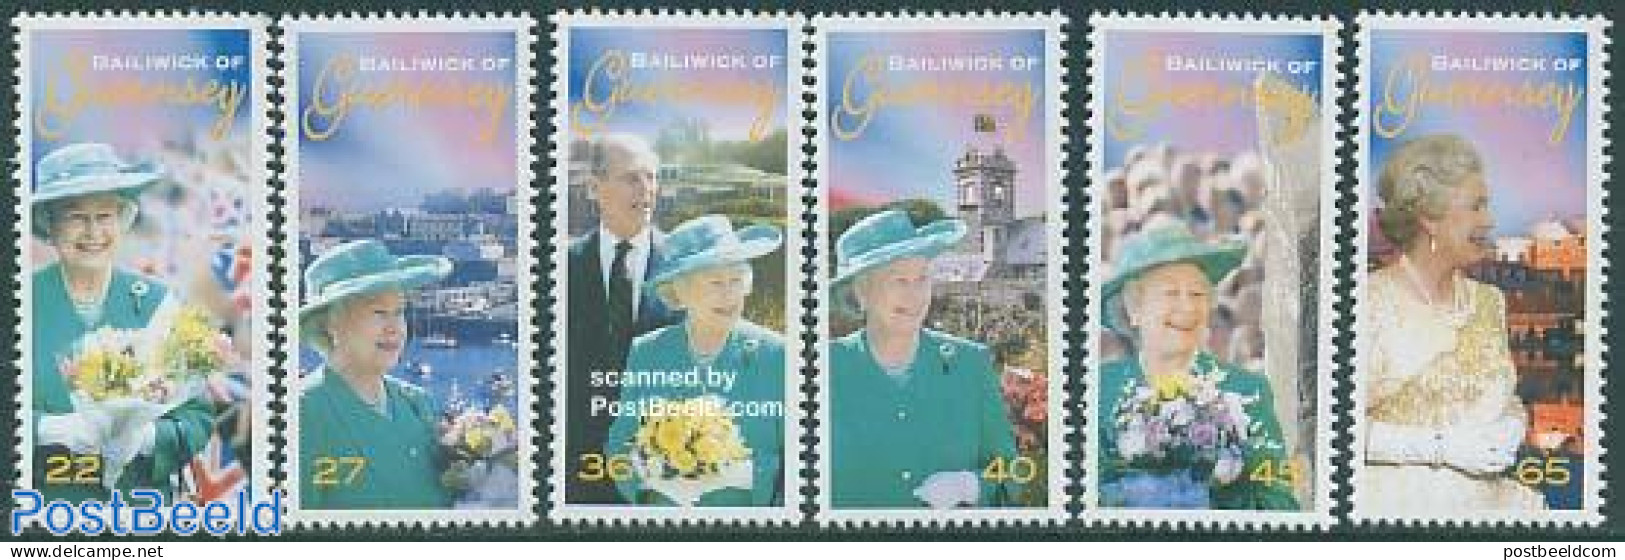 Guernsey 2002 Accession Golden Anniversary 6v, Mint NH, History - Nature - Kings & Queens (Royalty) - Flowers & Plants - Familias Reales